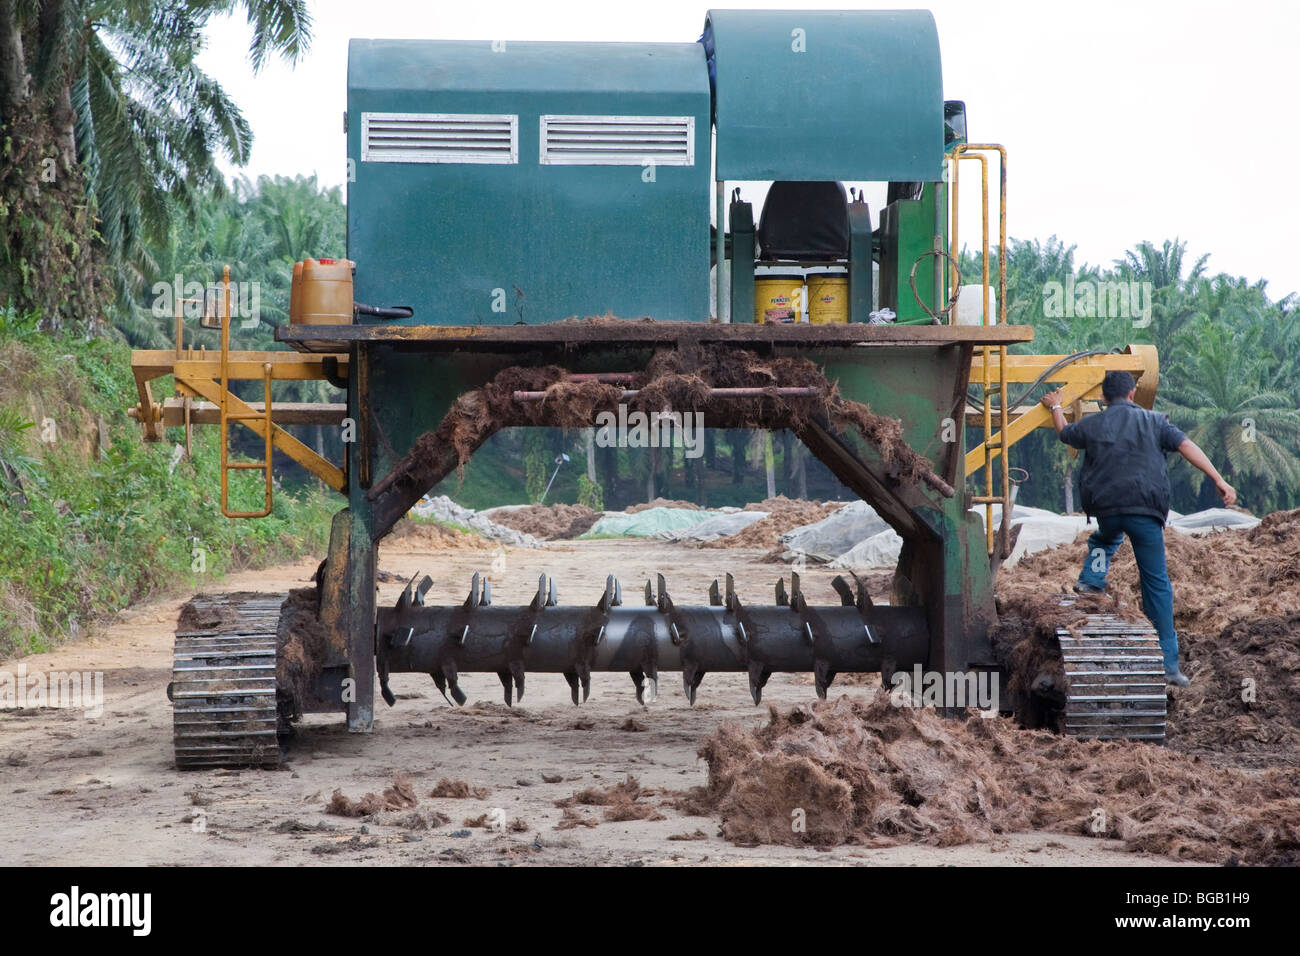 This machine is used to aerate the compost piles by turning them over. Sindora Palm Oil Plantation Stock Photo